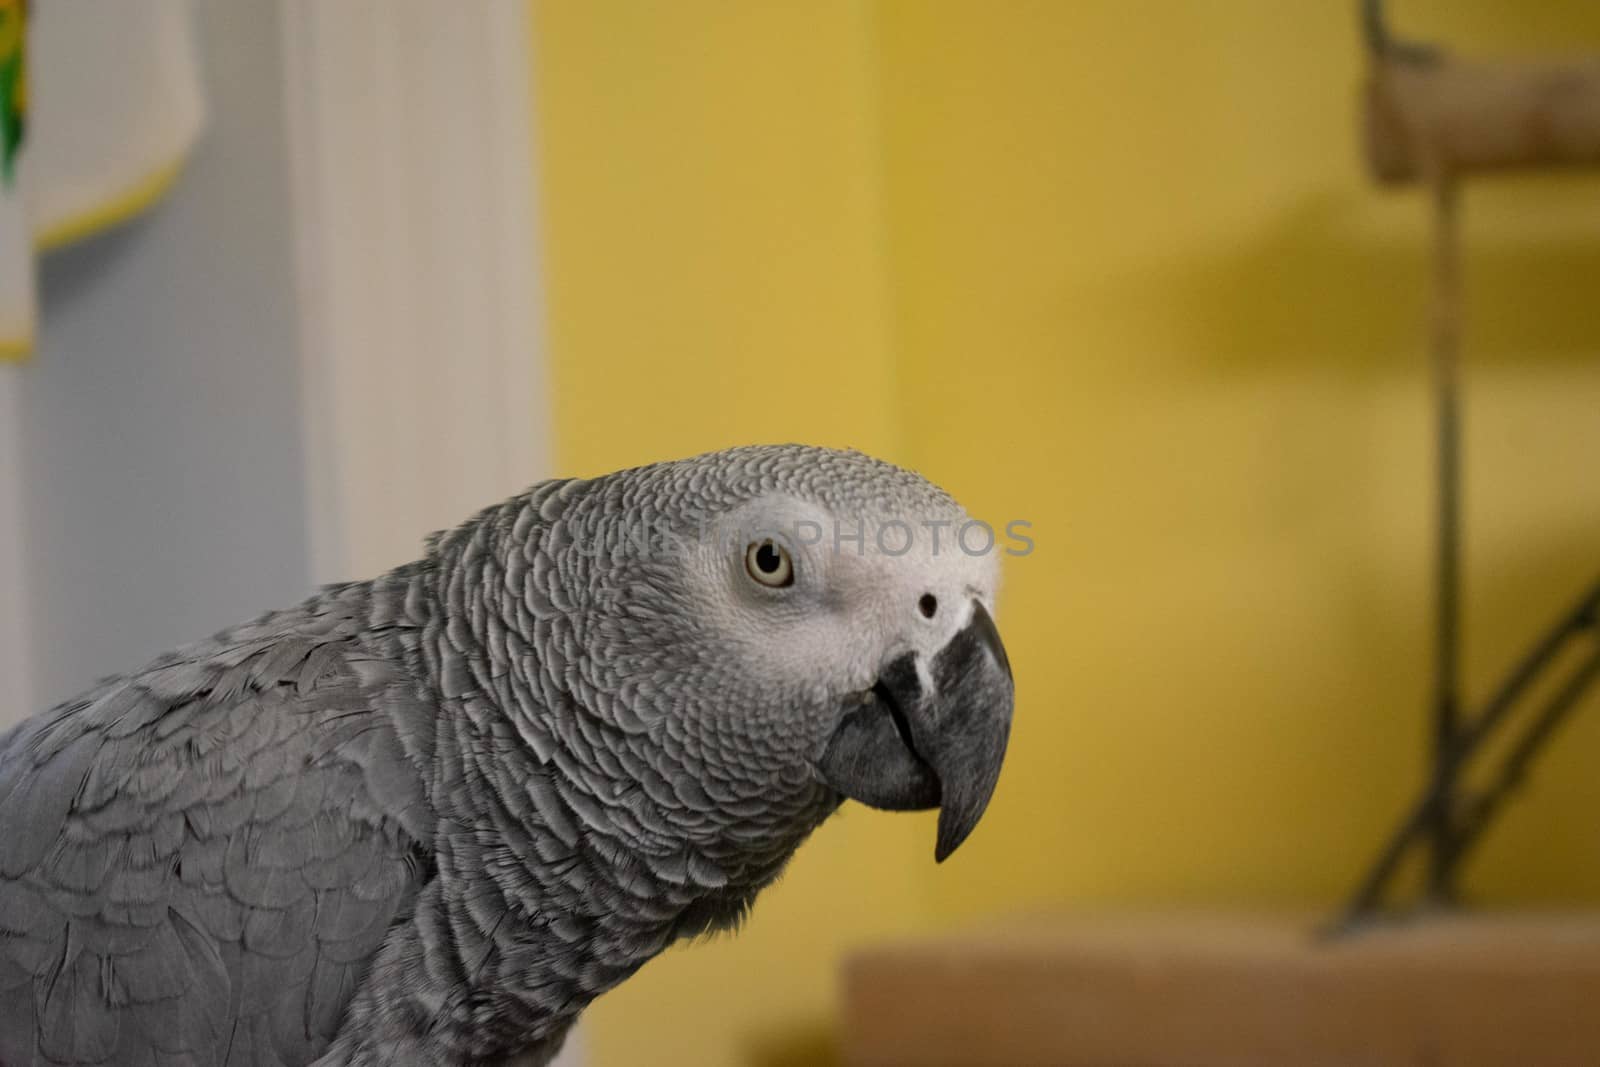 An African Gray Parrot Looking at the Camera With a Yellow Wall  by bju12290